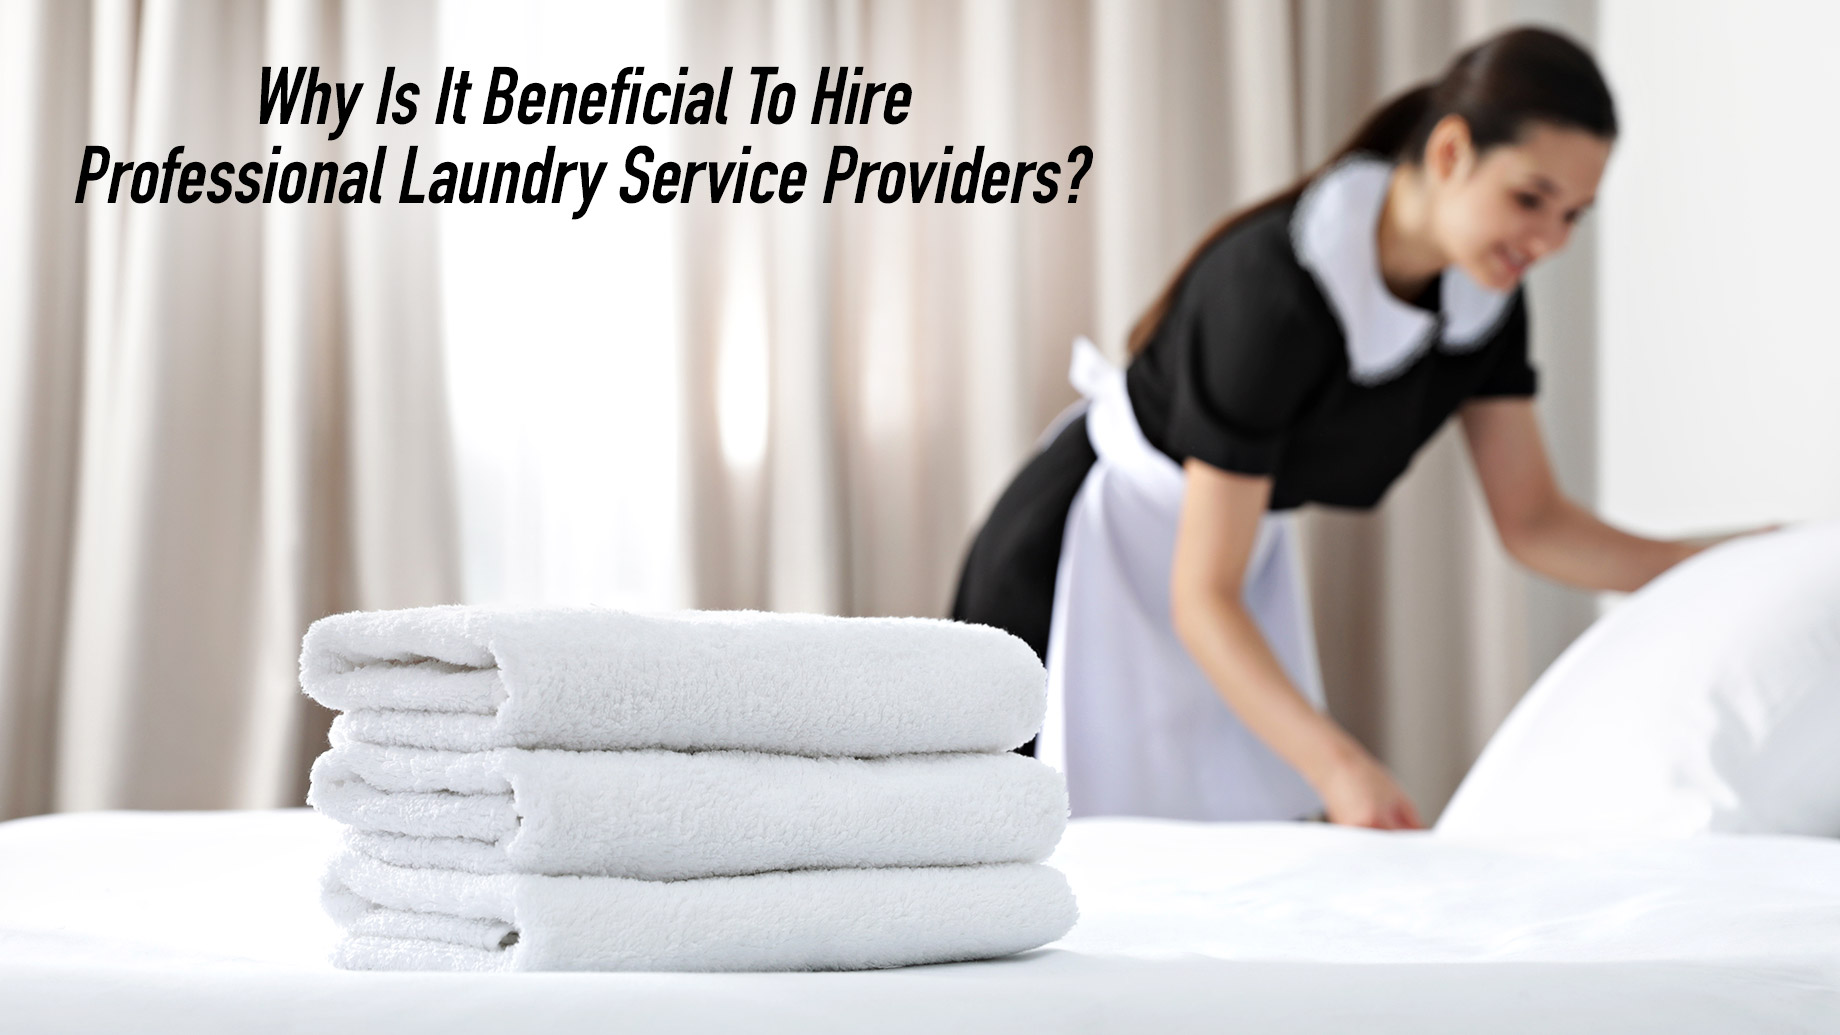 Why Is It Beneficial To Hire Professional Laundry Service Providers?